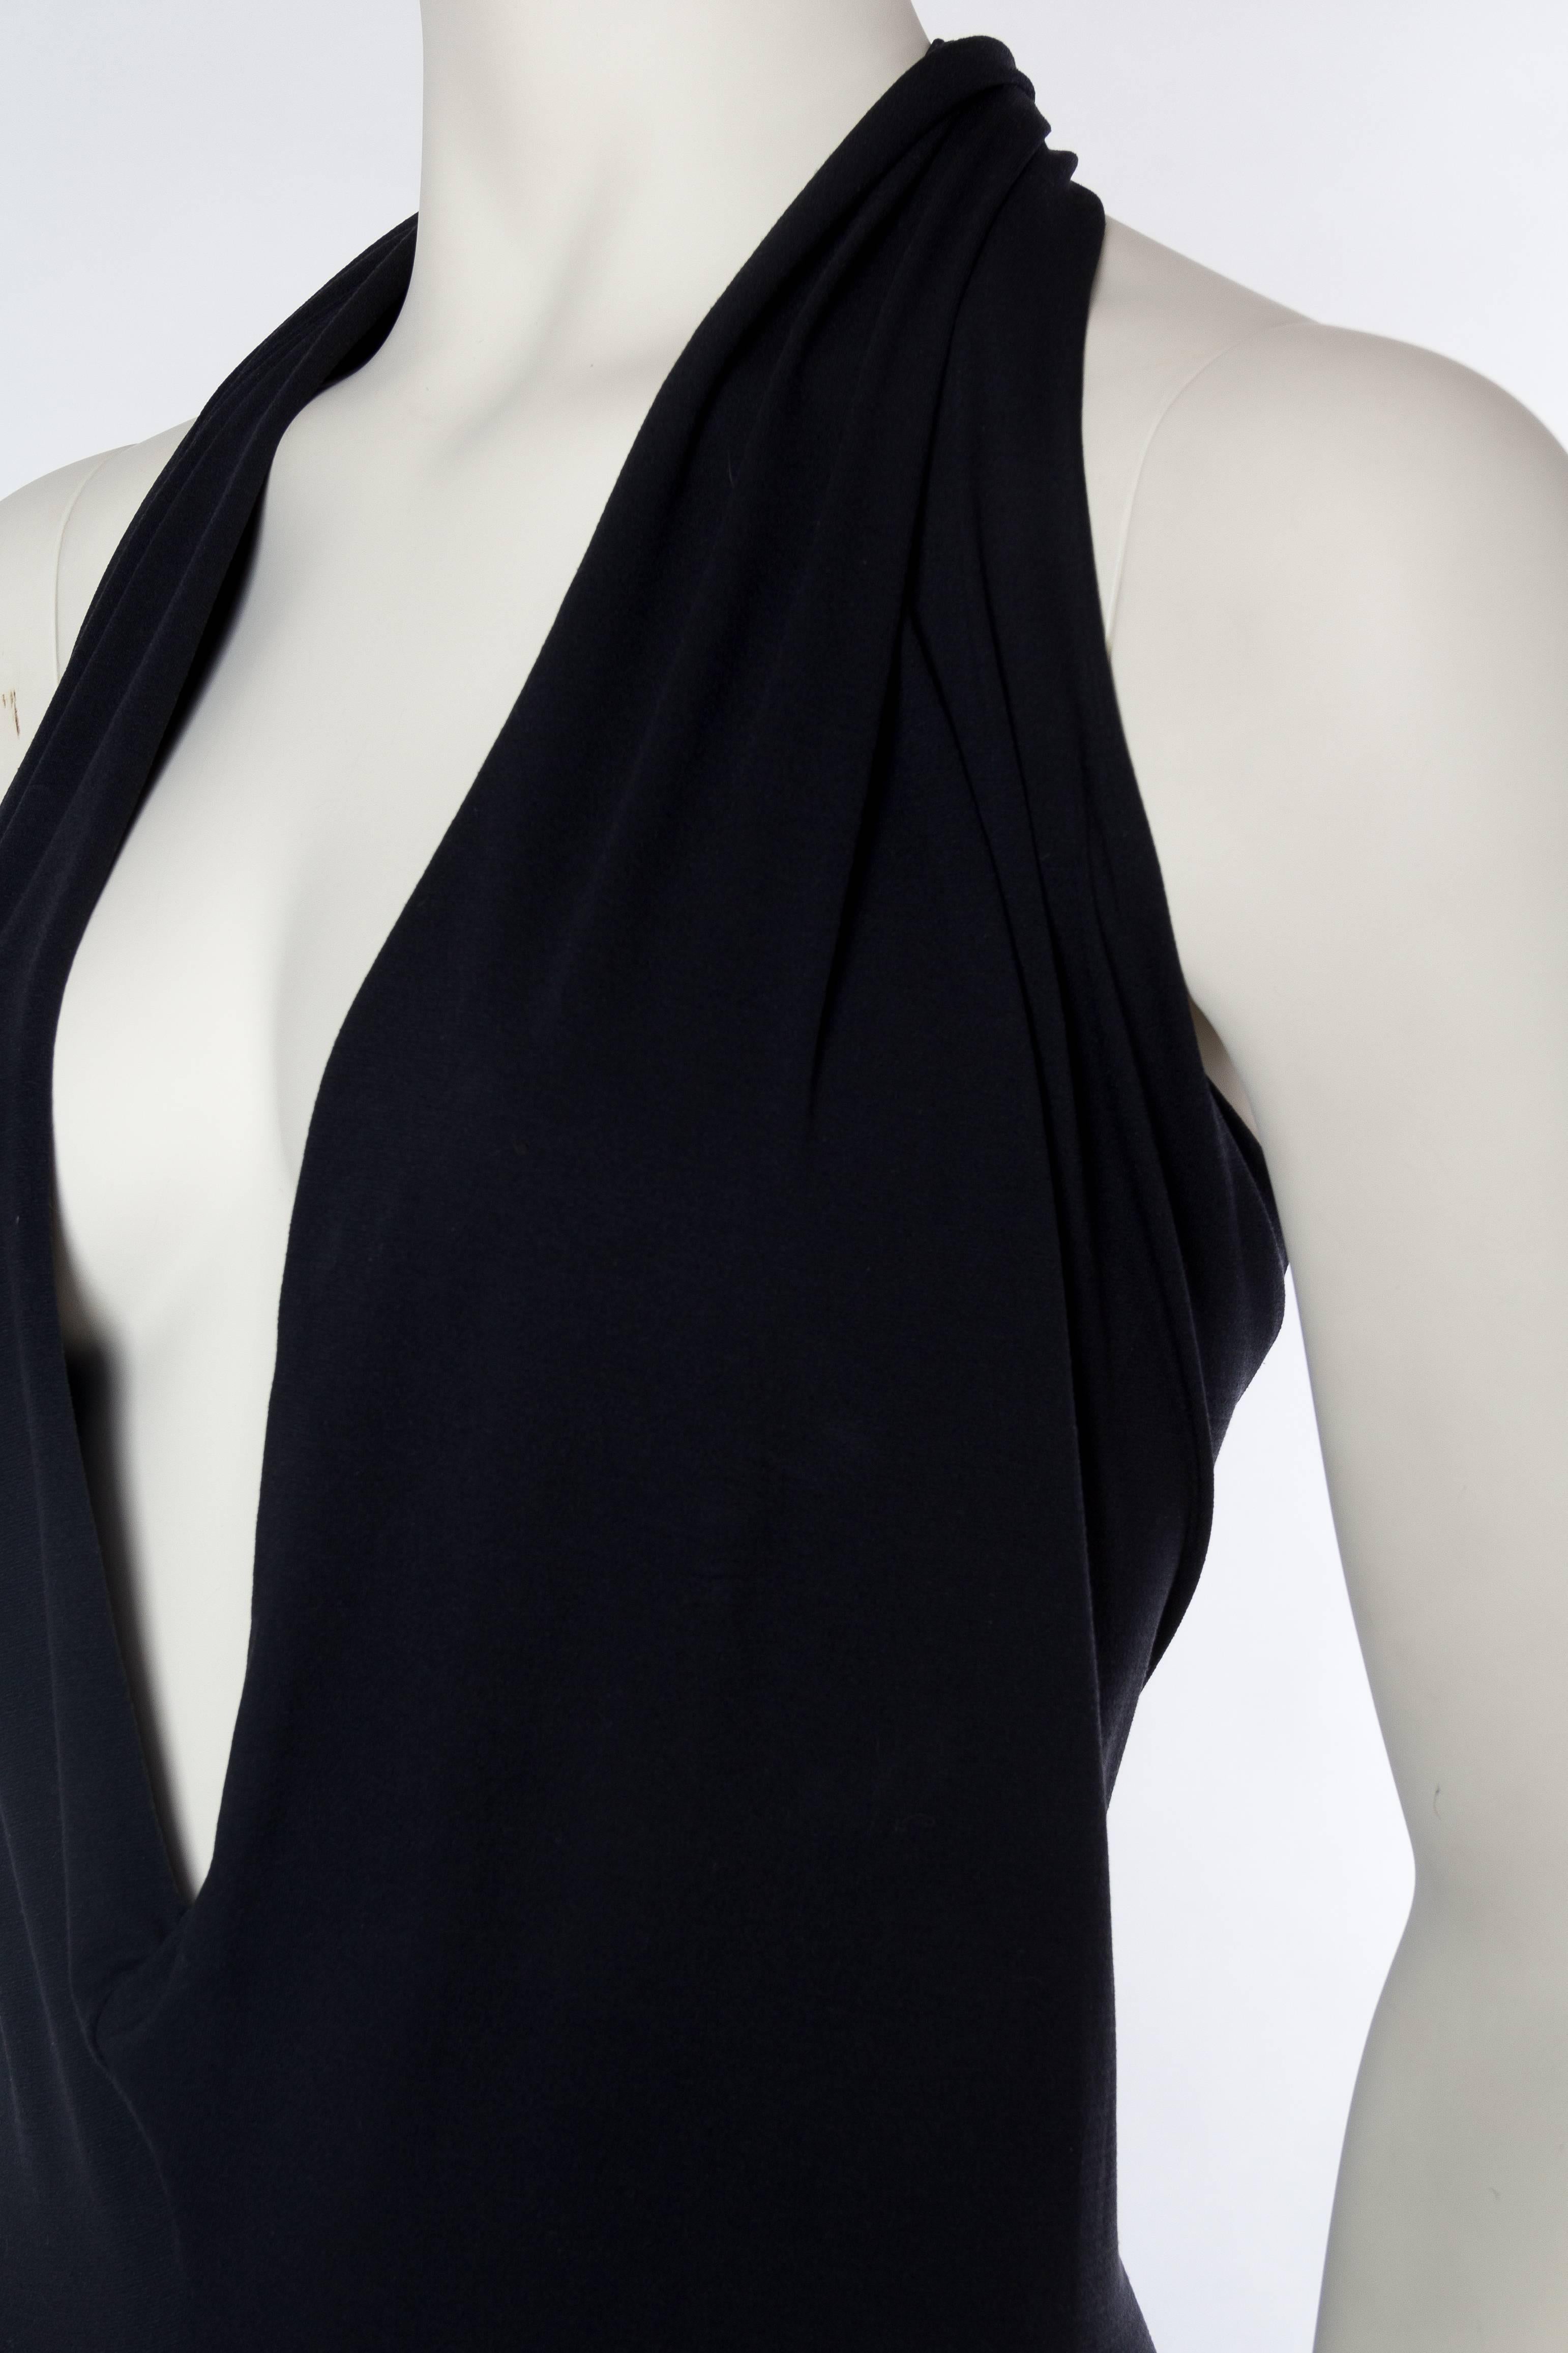 Plunging Backless Slinky Jersey Gown By Karl Lagerfeld 2